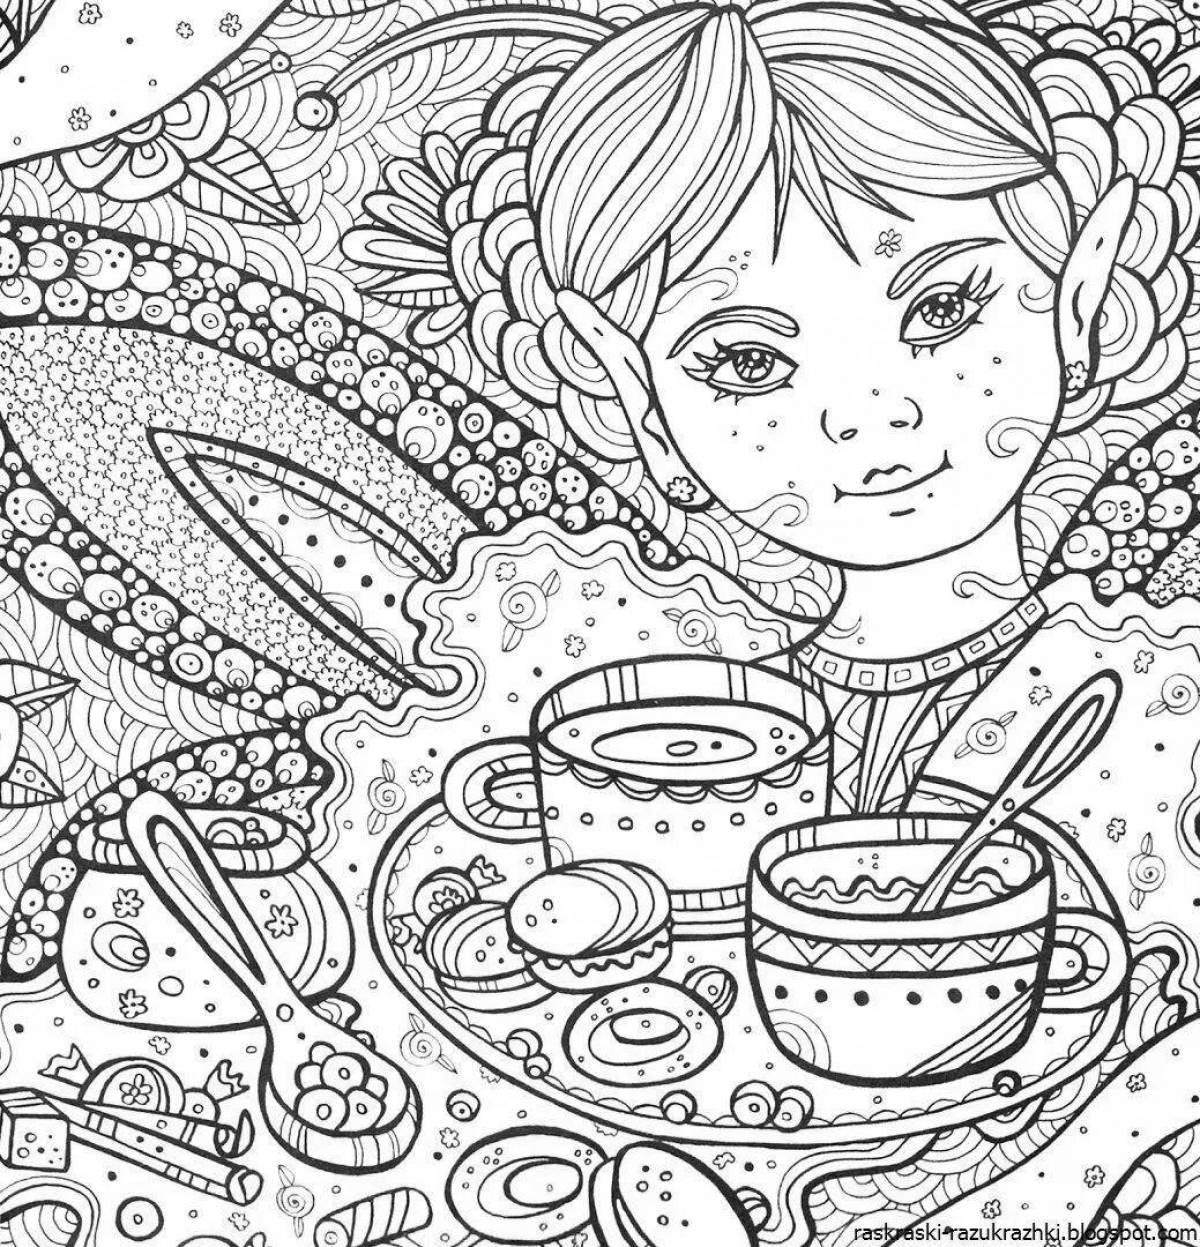 Great antistress coloring book for girls 8 years old